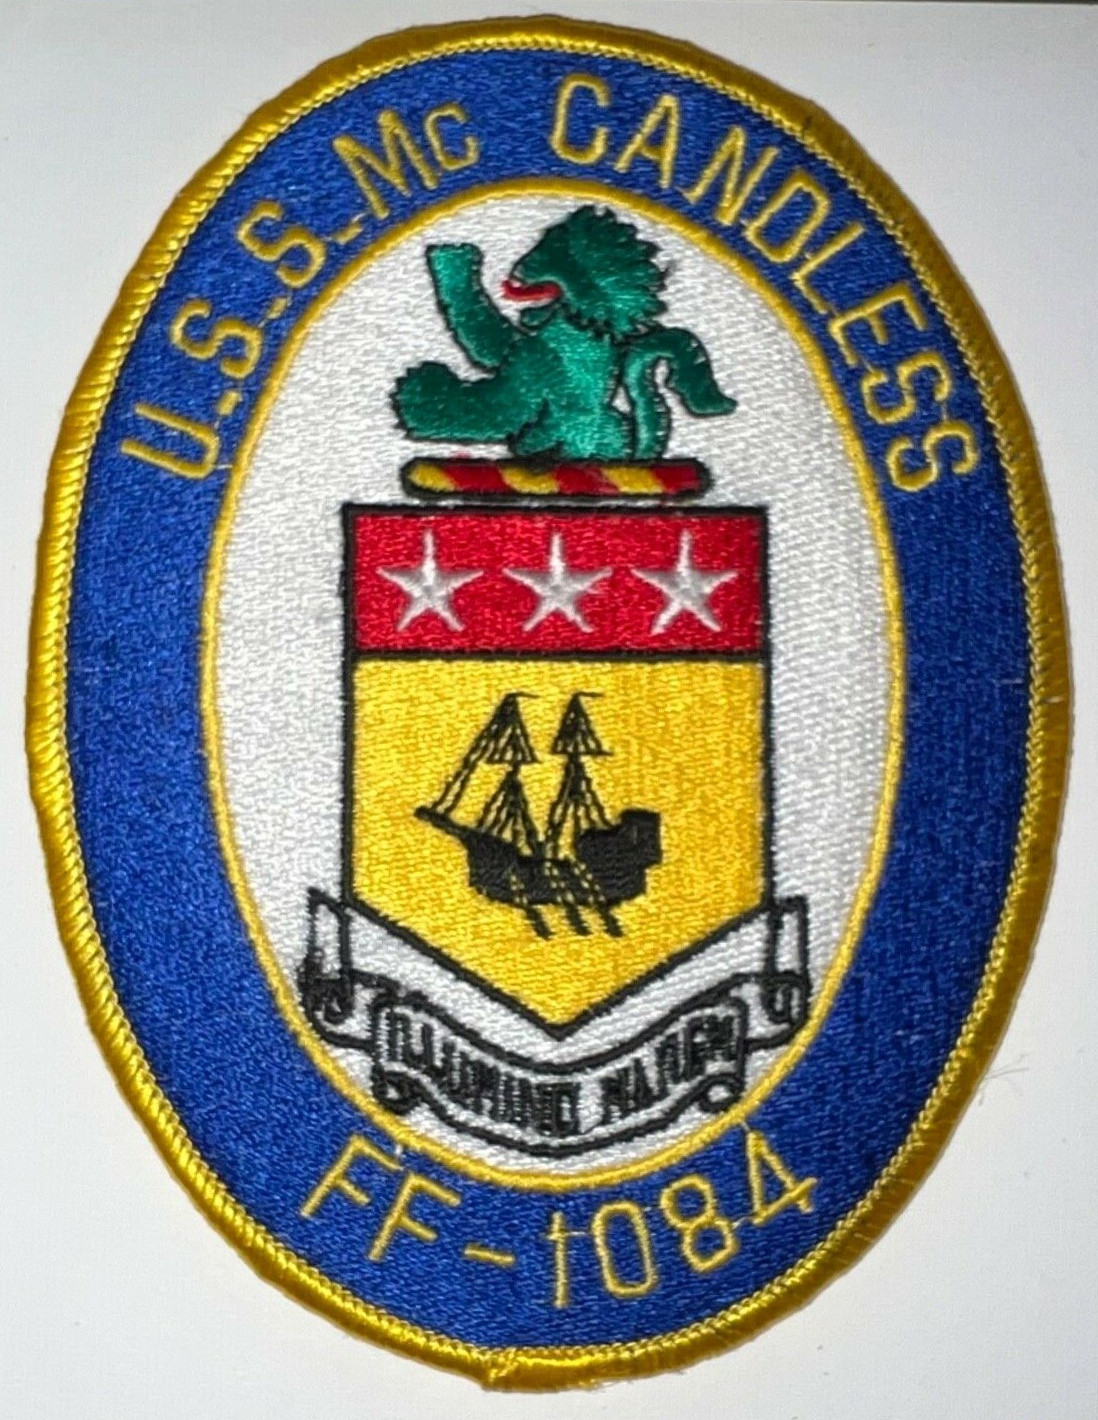 [Image: Oval military patch reading 'U.S.S. McCandless FF-1084', and featuring the McCandlish/McCandless coat of arms, with lion crest, and the motto 'Illumino Marem']